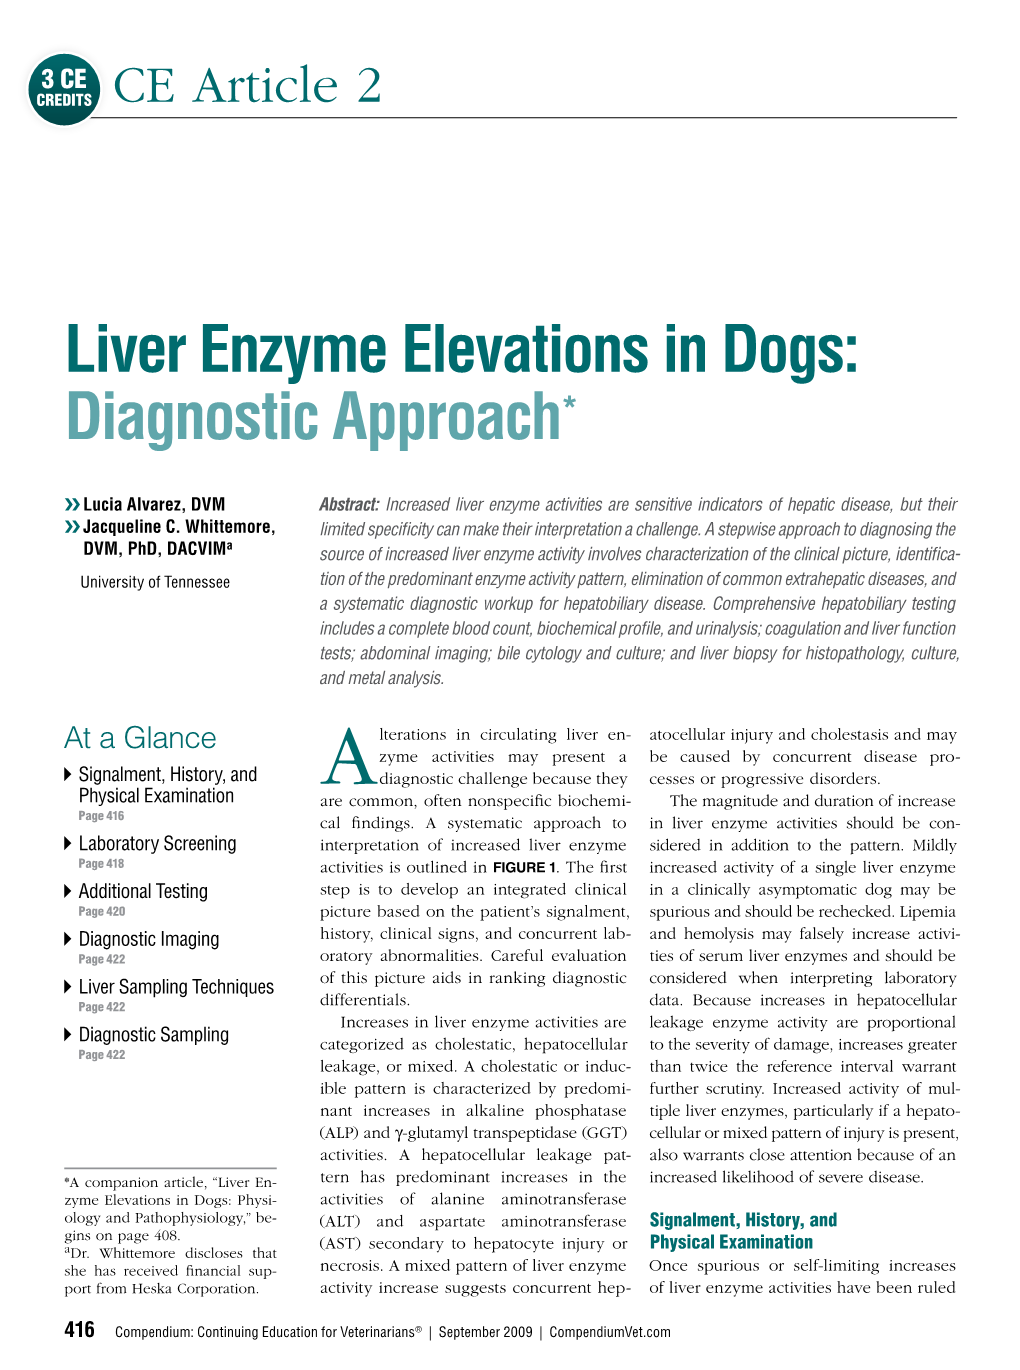 Liver Enzyme Elevations in Dogs: Diagnostic Approach*